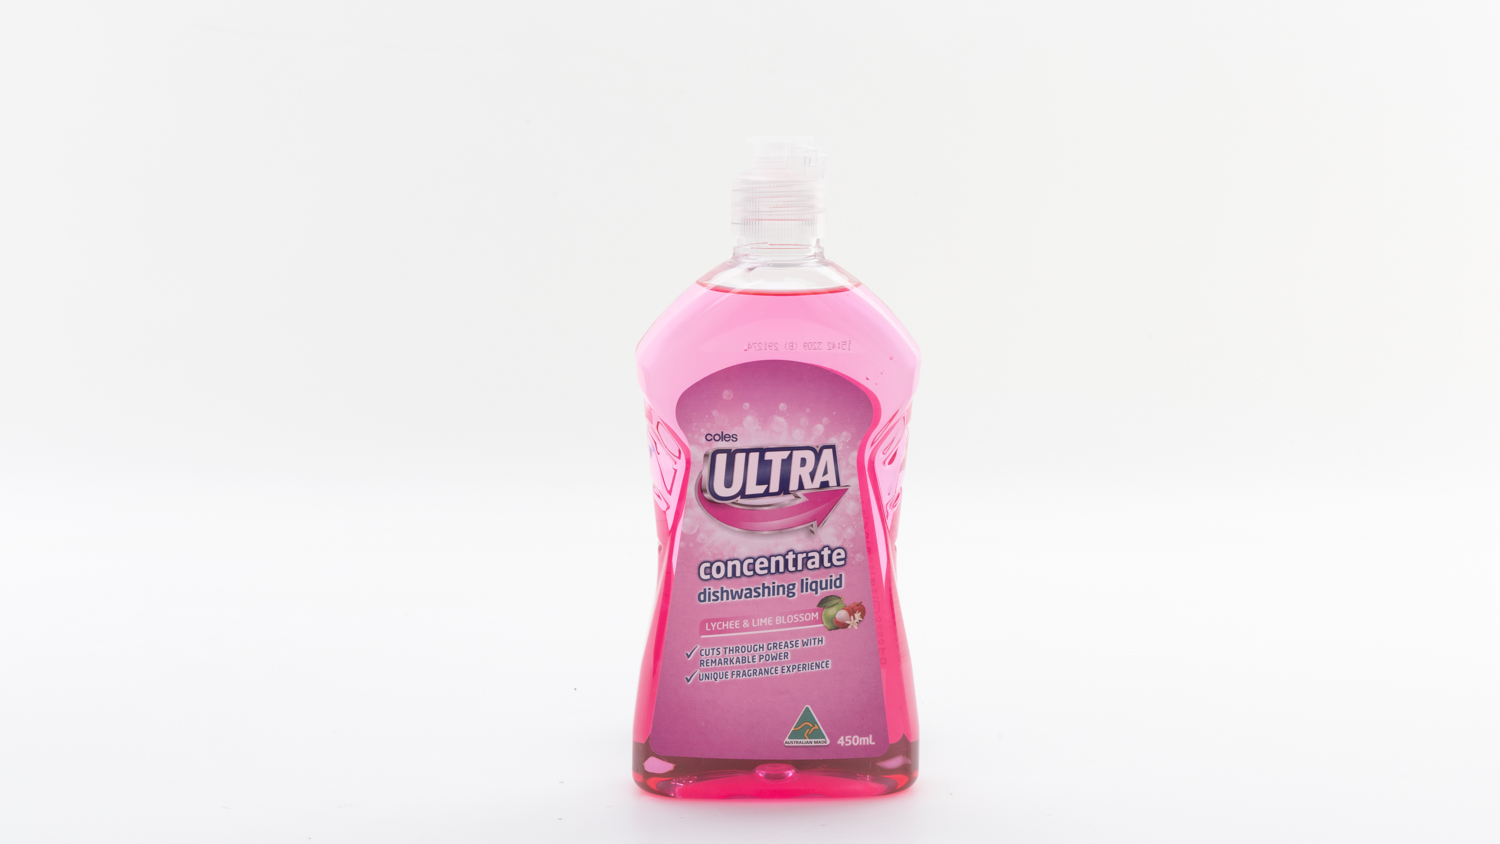 Coles Ultra Concentrate Dishwashing Liquid Lychee & Lime Bloosom carousel image